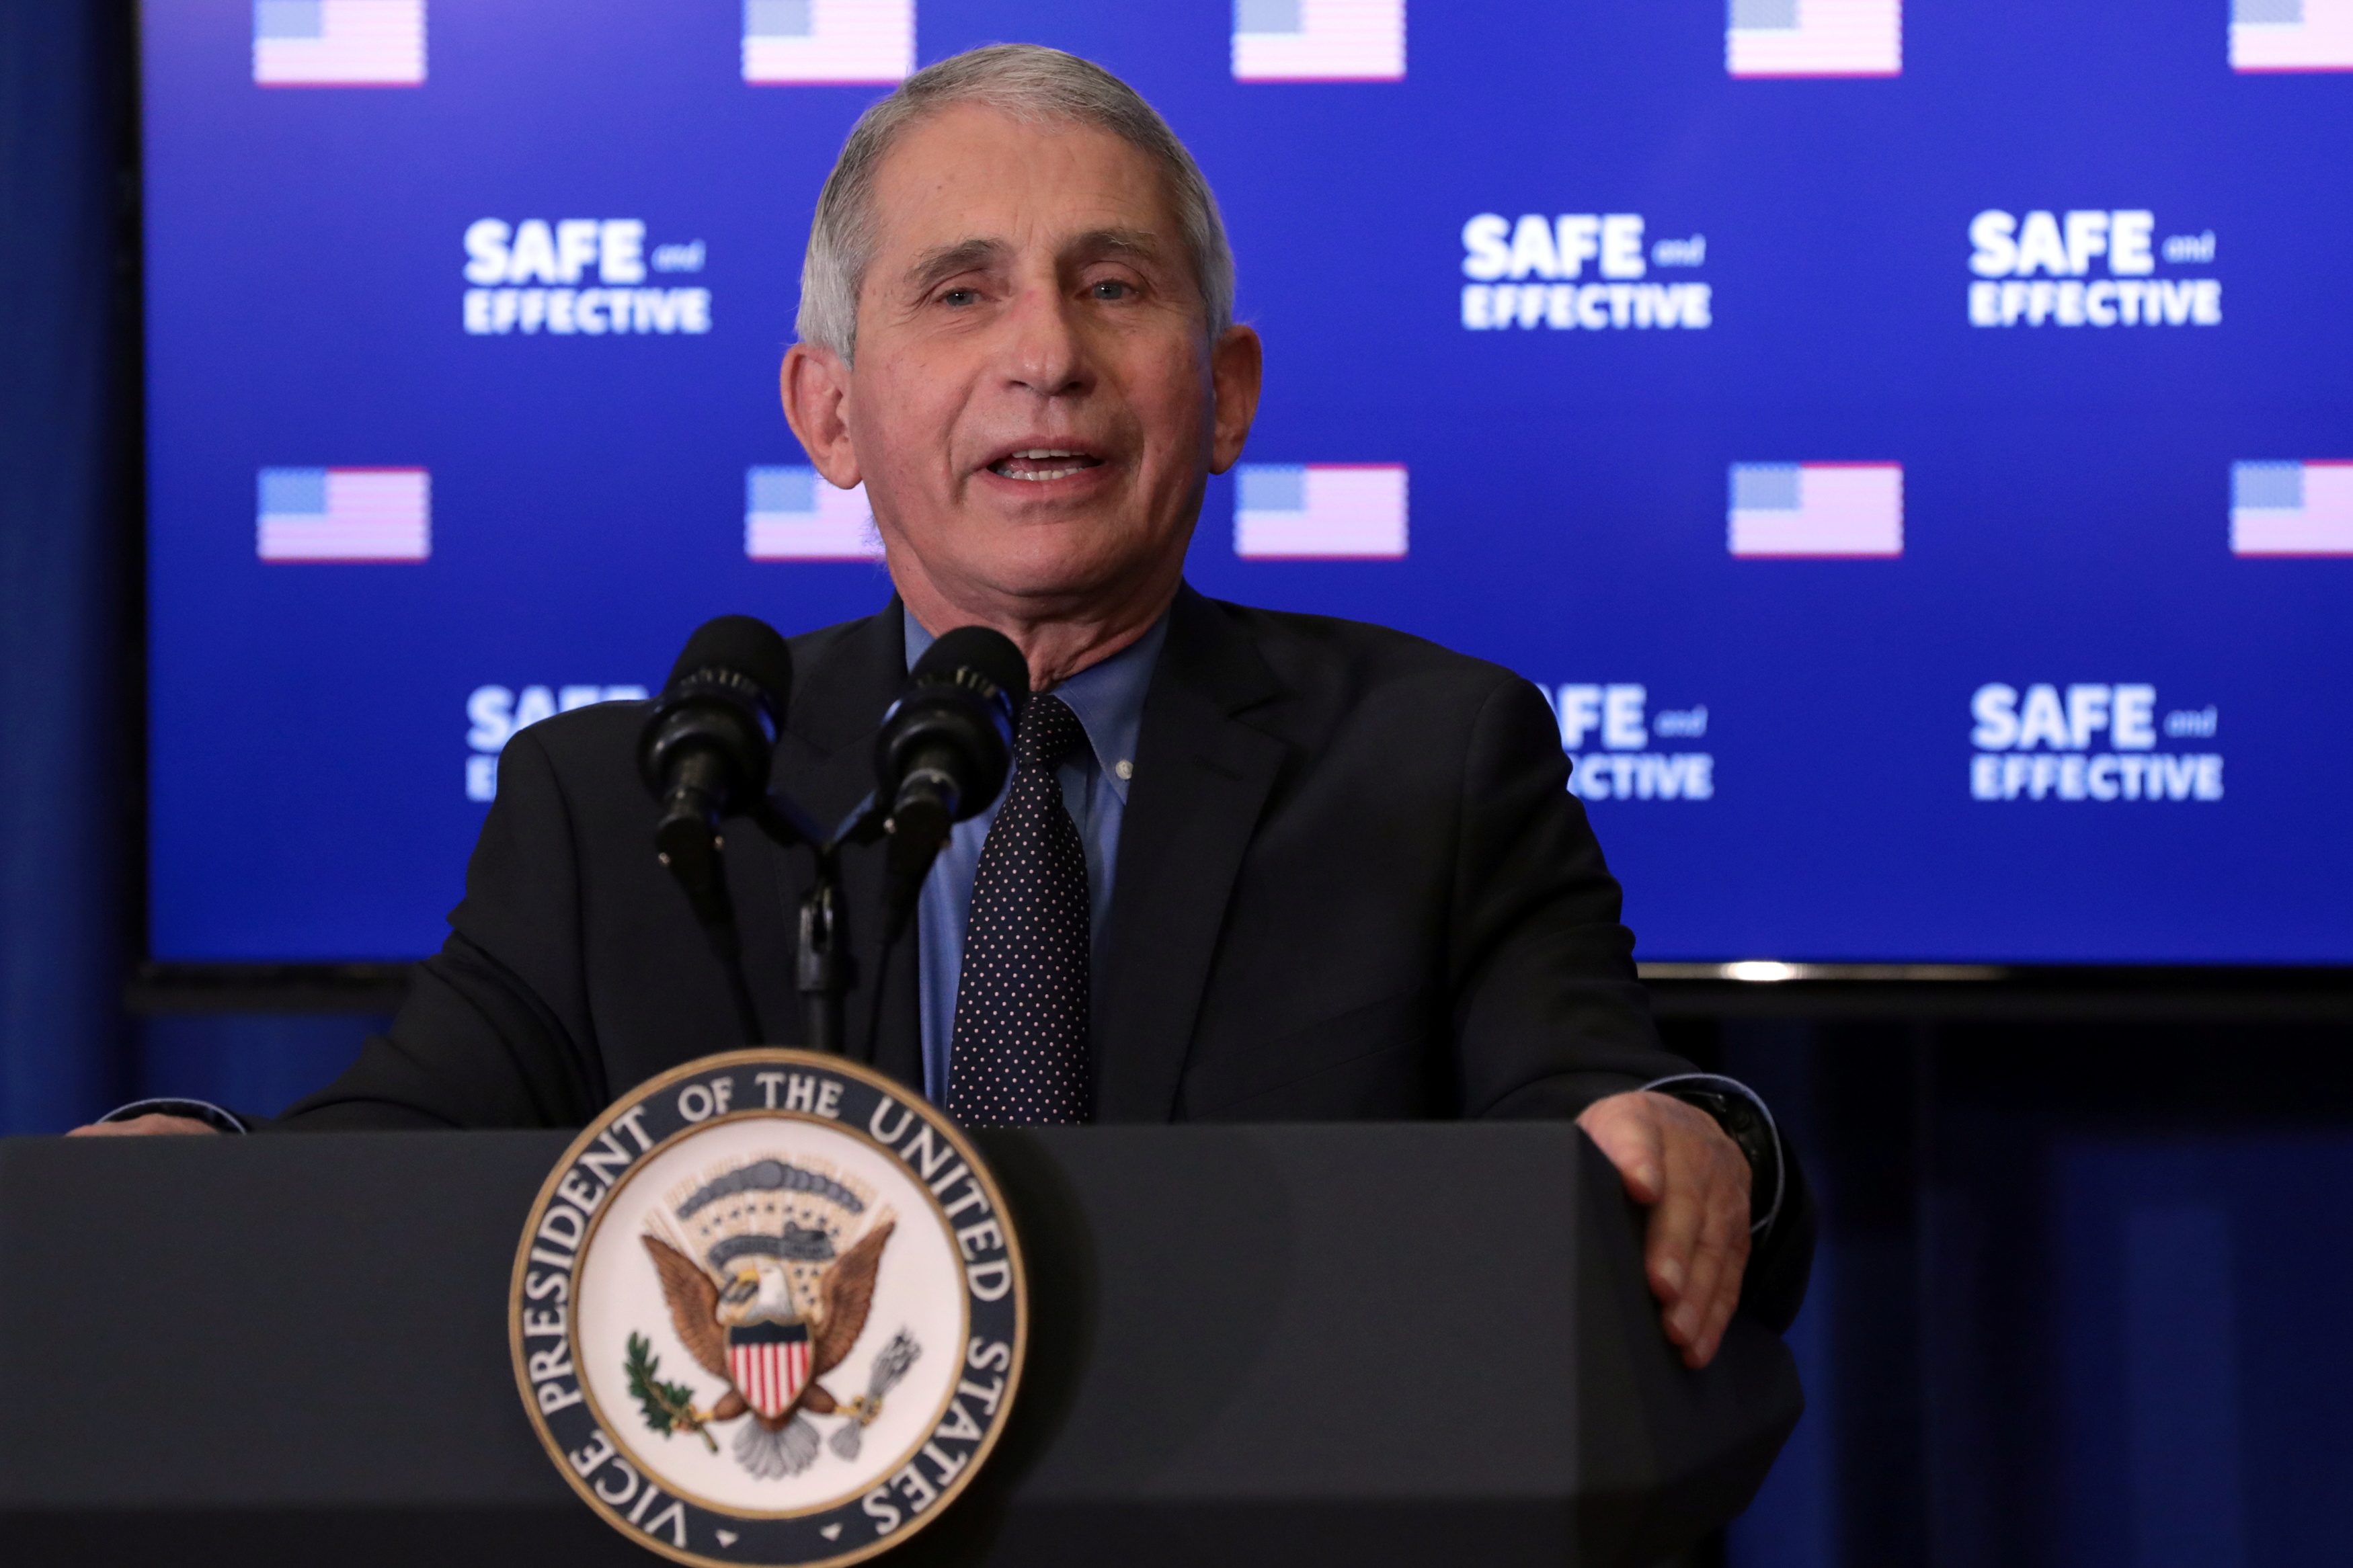 Dr. Anthony Fauci, director of the National Institute of Allergy and Infectious Diseases, speaks at an event where U.S. Vice President Mike Pence received the coronavirus disease (COVID-19) vaccine at the White House in Washington, U.S., December 18, 2020. REUTERS/Cheriss May